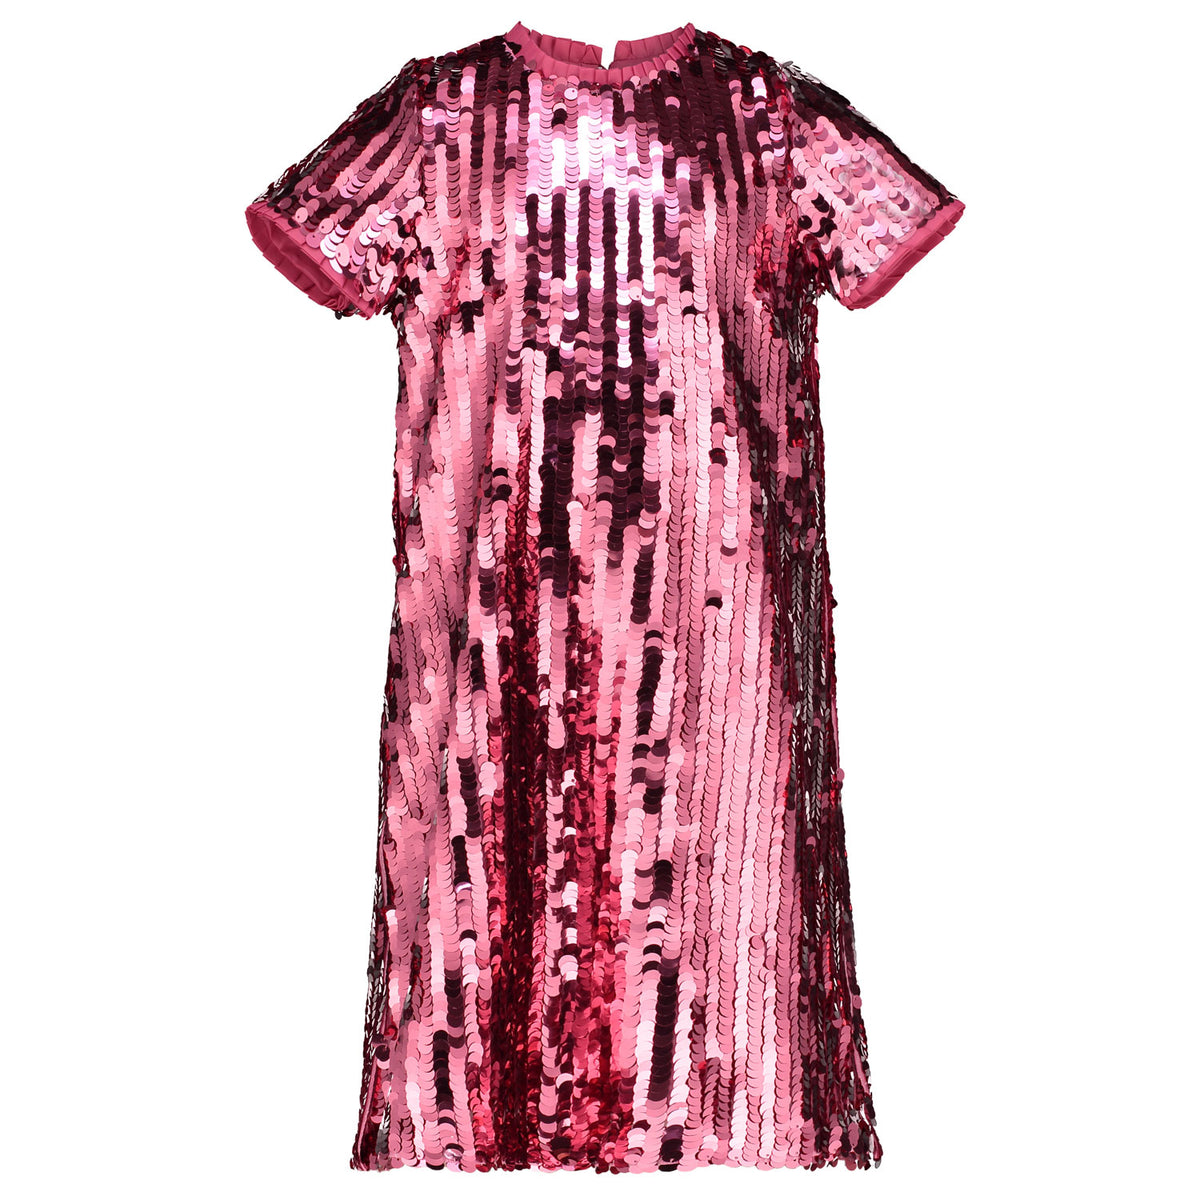 Girls Designer Party Dress Coco Pink Sequin | Holly Hastie London